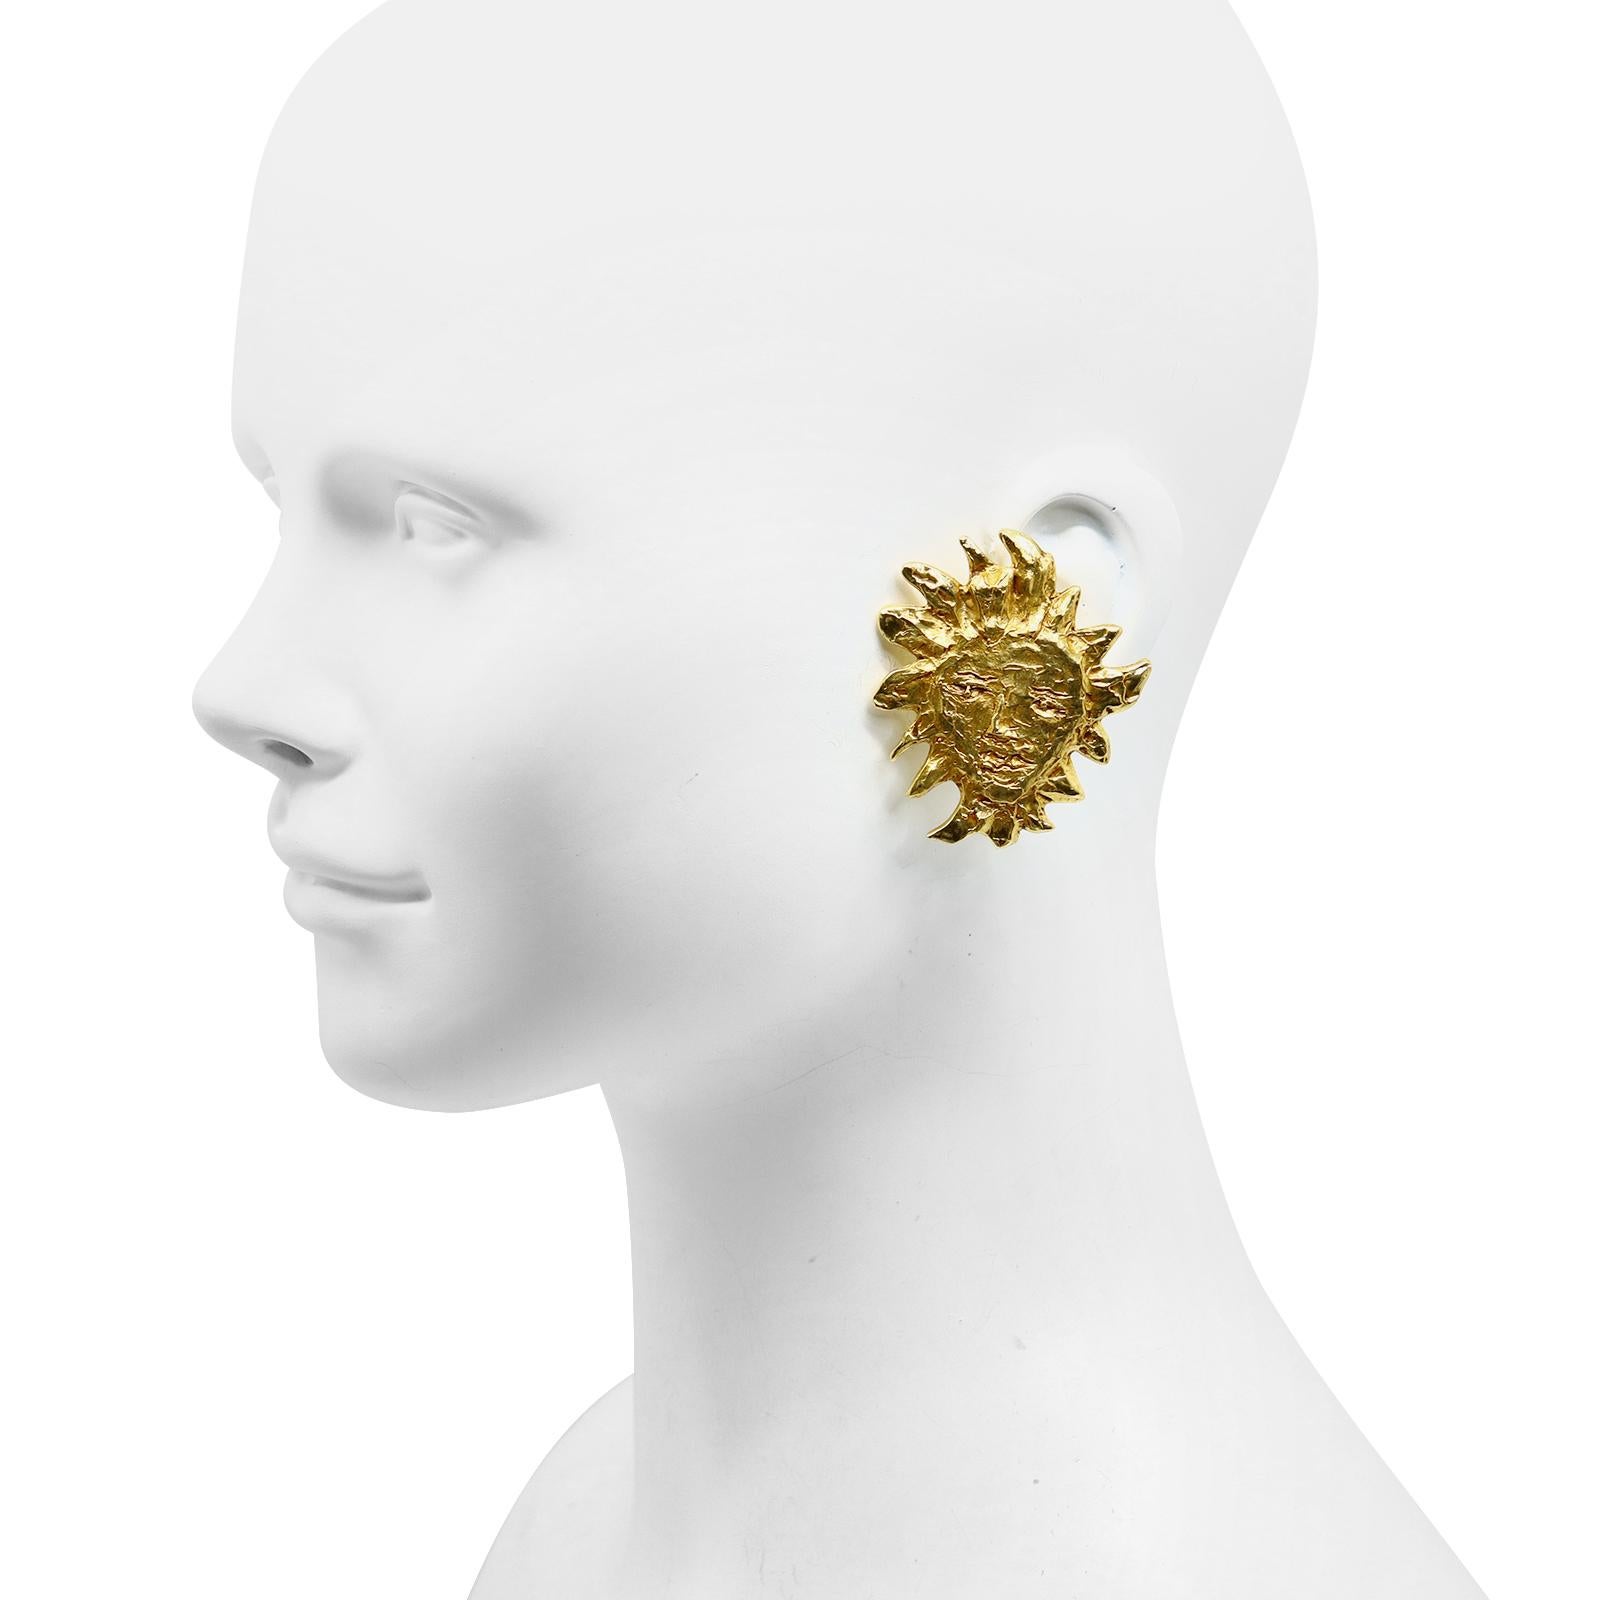 Vintage Yves Saint Laurent YSL Gold Sun Earrings.  These are iconic and classic earrings.  When you wear them you make a style statement that is chic and classic.    Clip On